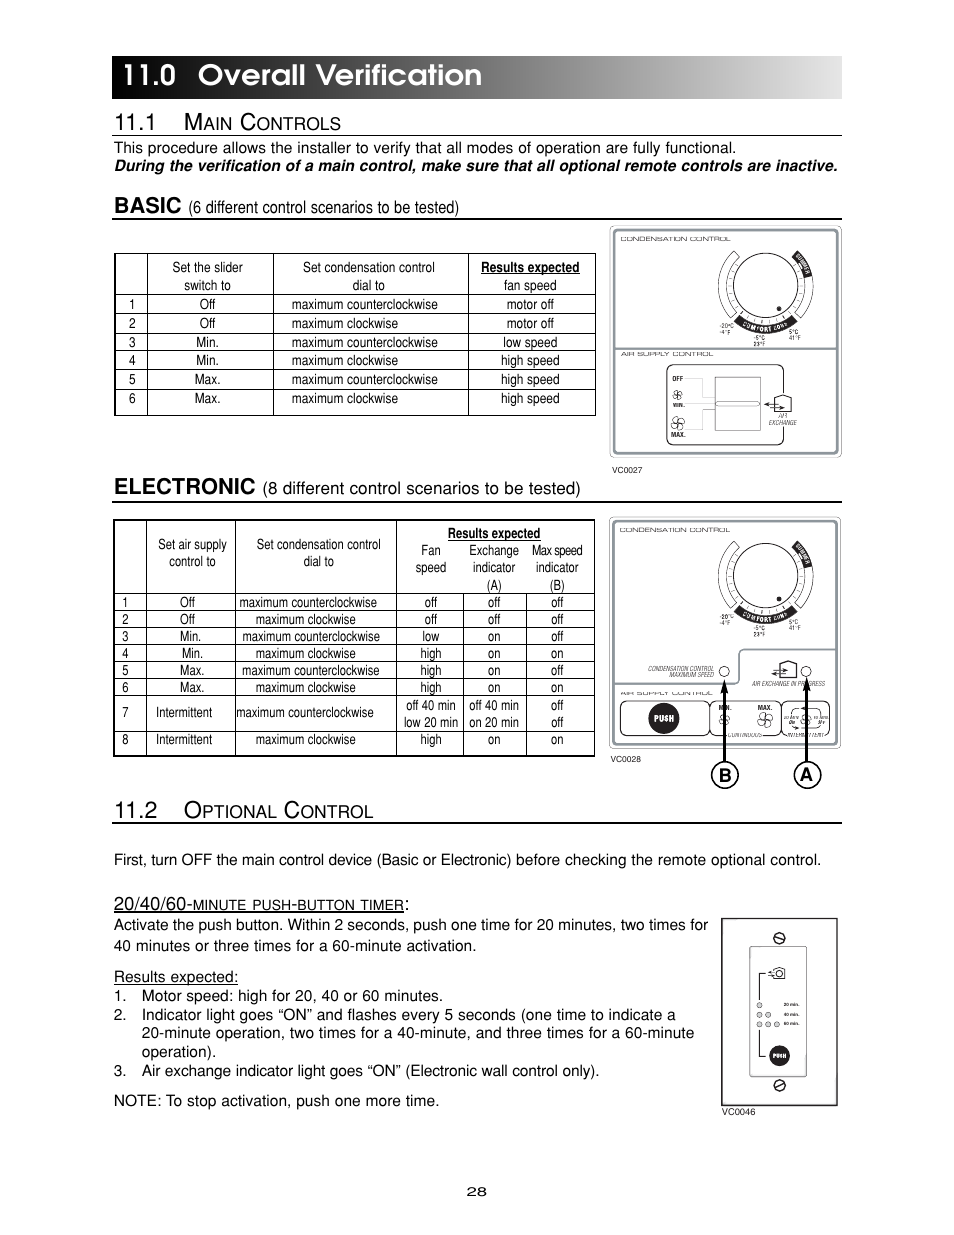 0 overall verification, Basic, Electronic | 6 different control scenarios to be tested), Ontrols, 8 different control scenarios to be tested), Ptional, Ontrol | Maytag Ventilation Systems HRV-210 User Manual | Page 28 / 32